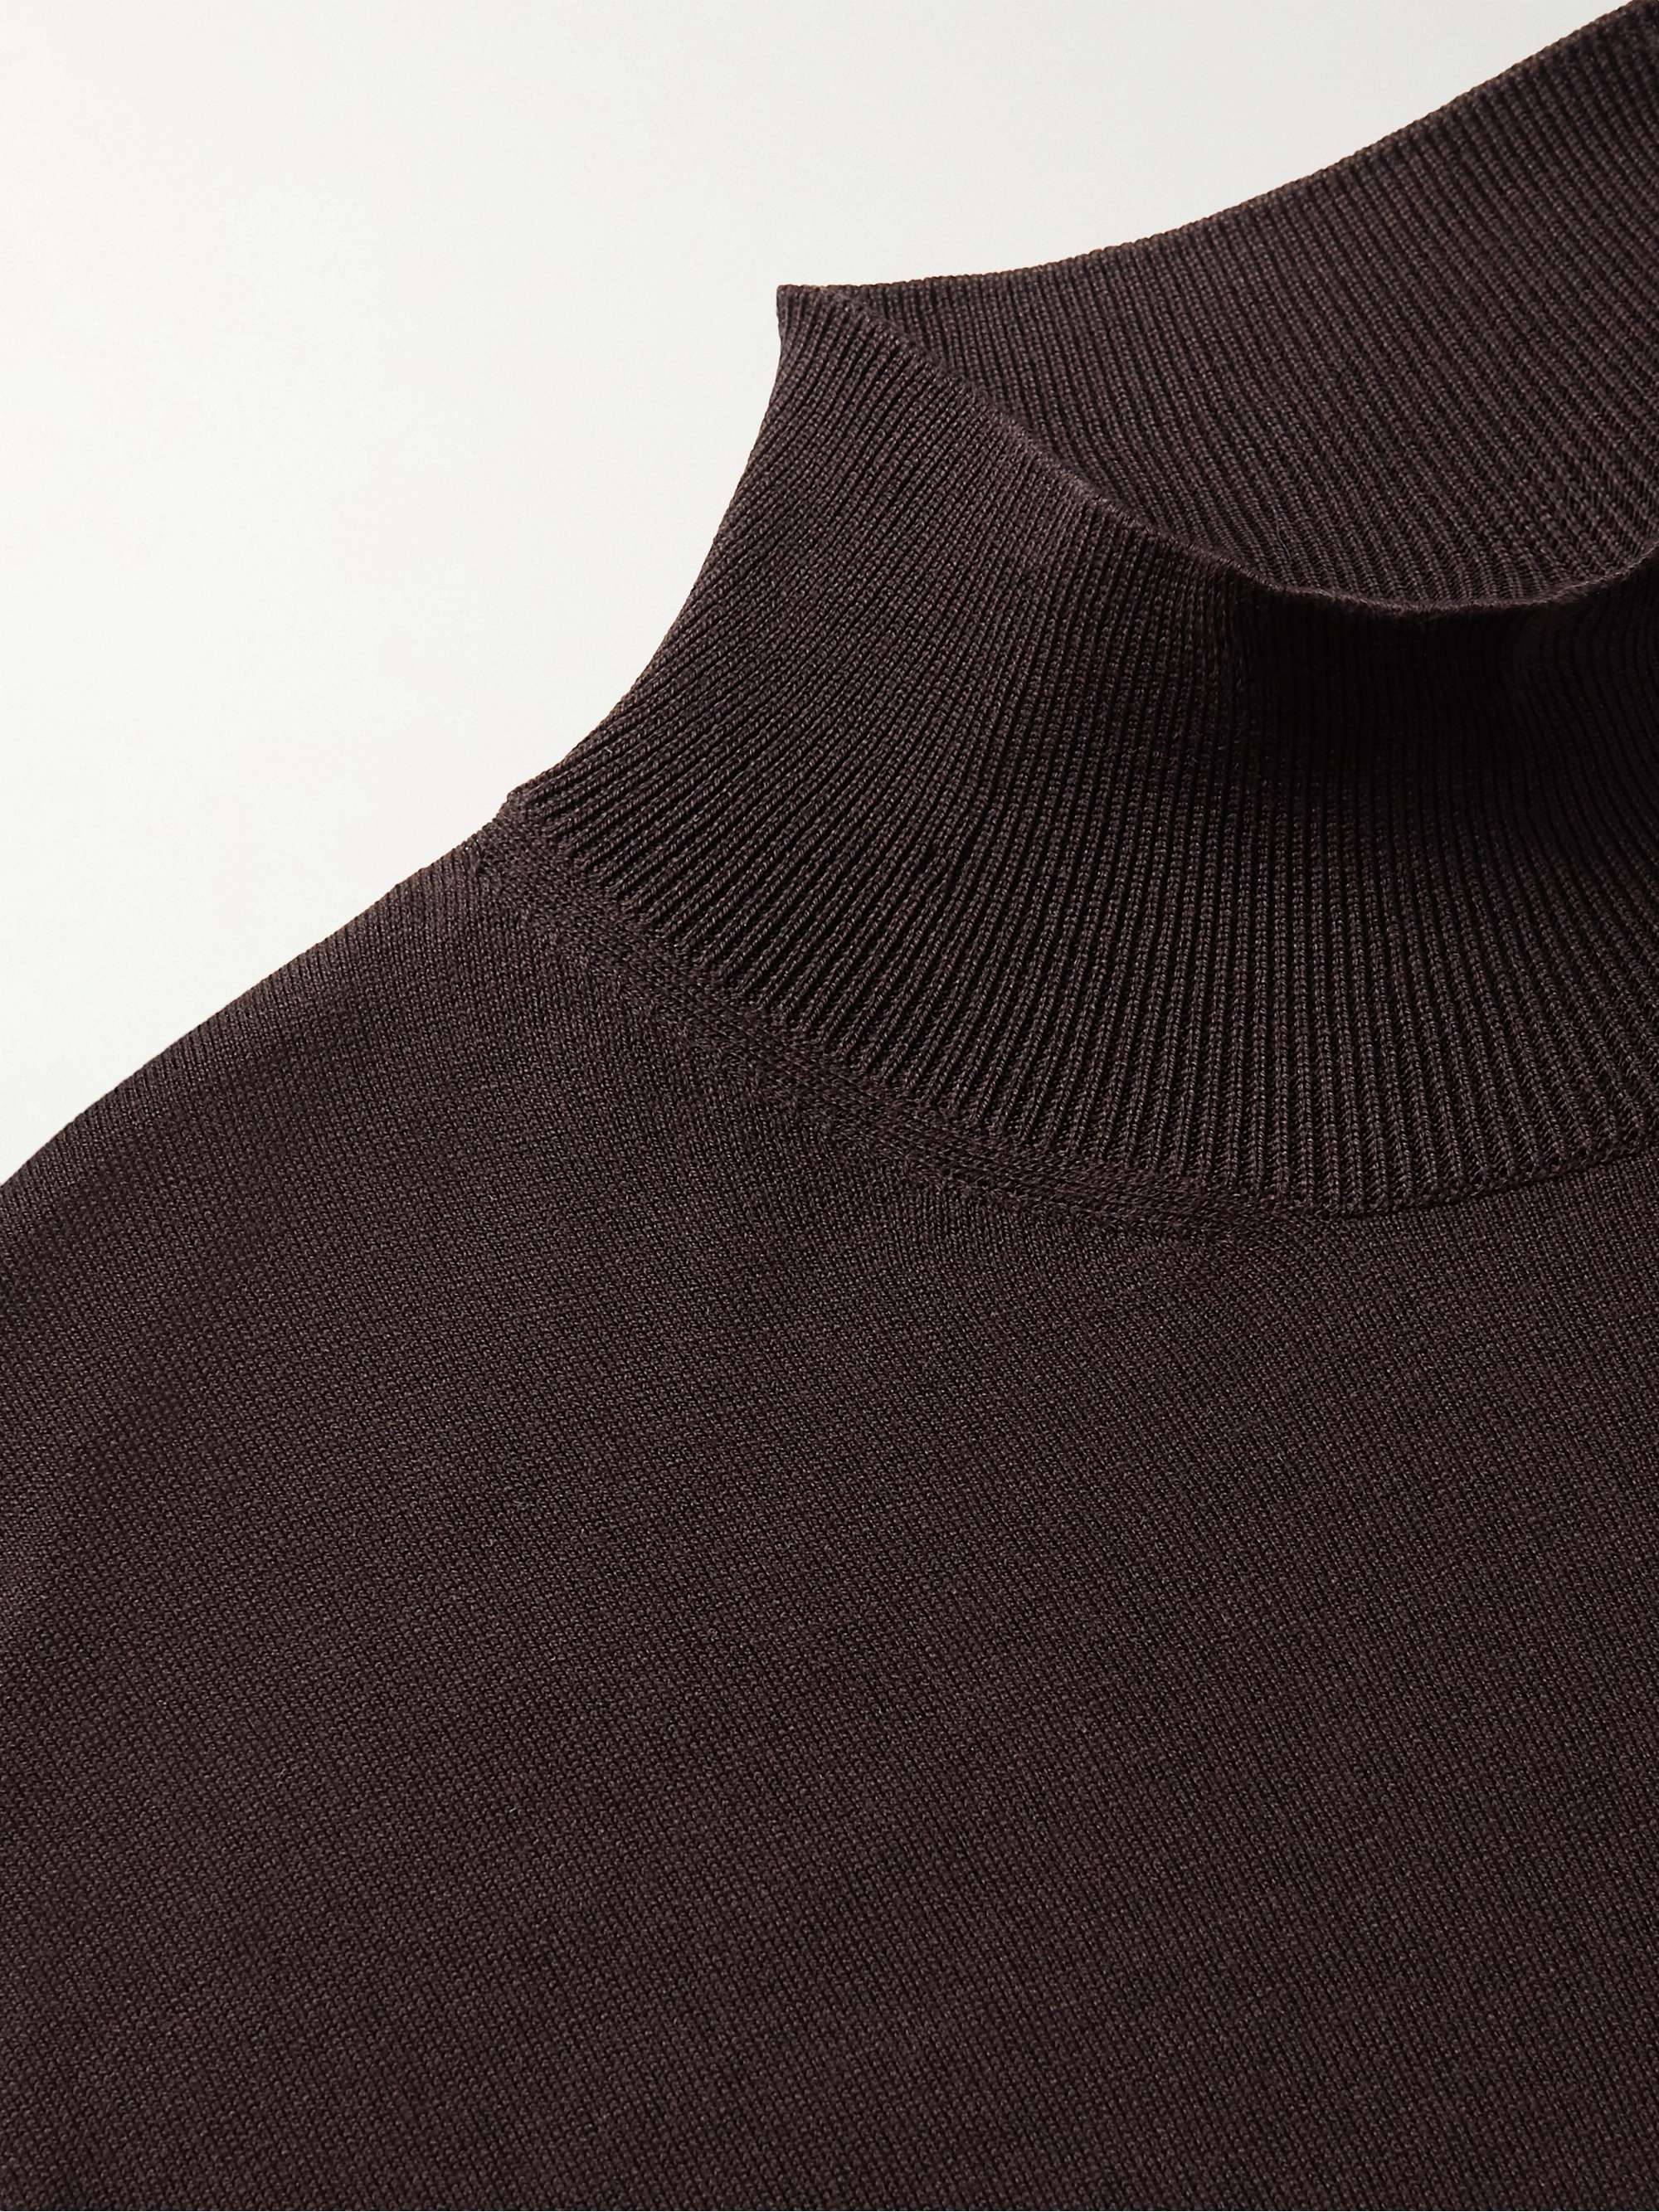 DUNHILL Slim-Fit Mulberry Silk and Cotton-Blend Mock-Neck Sweater